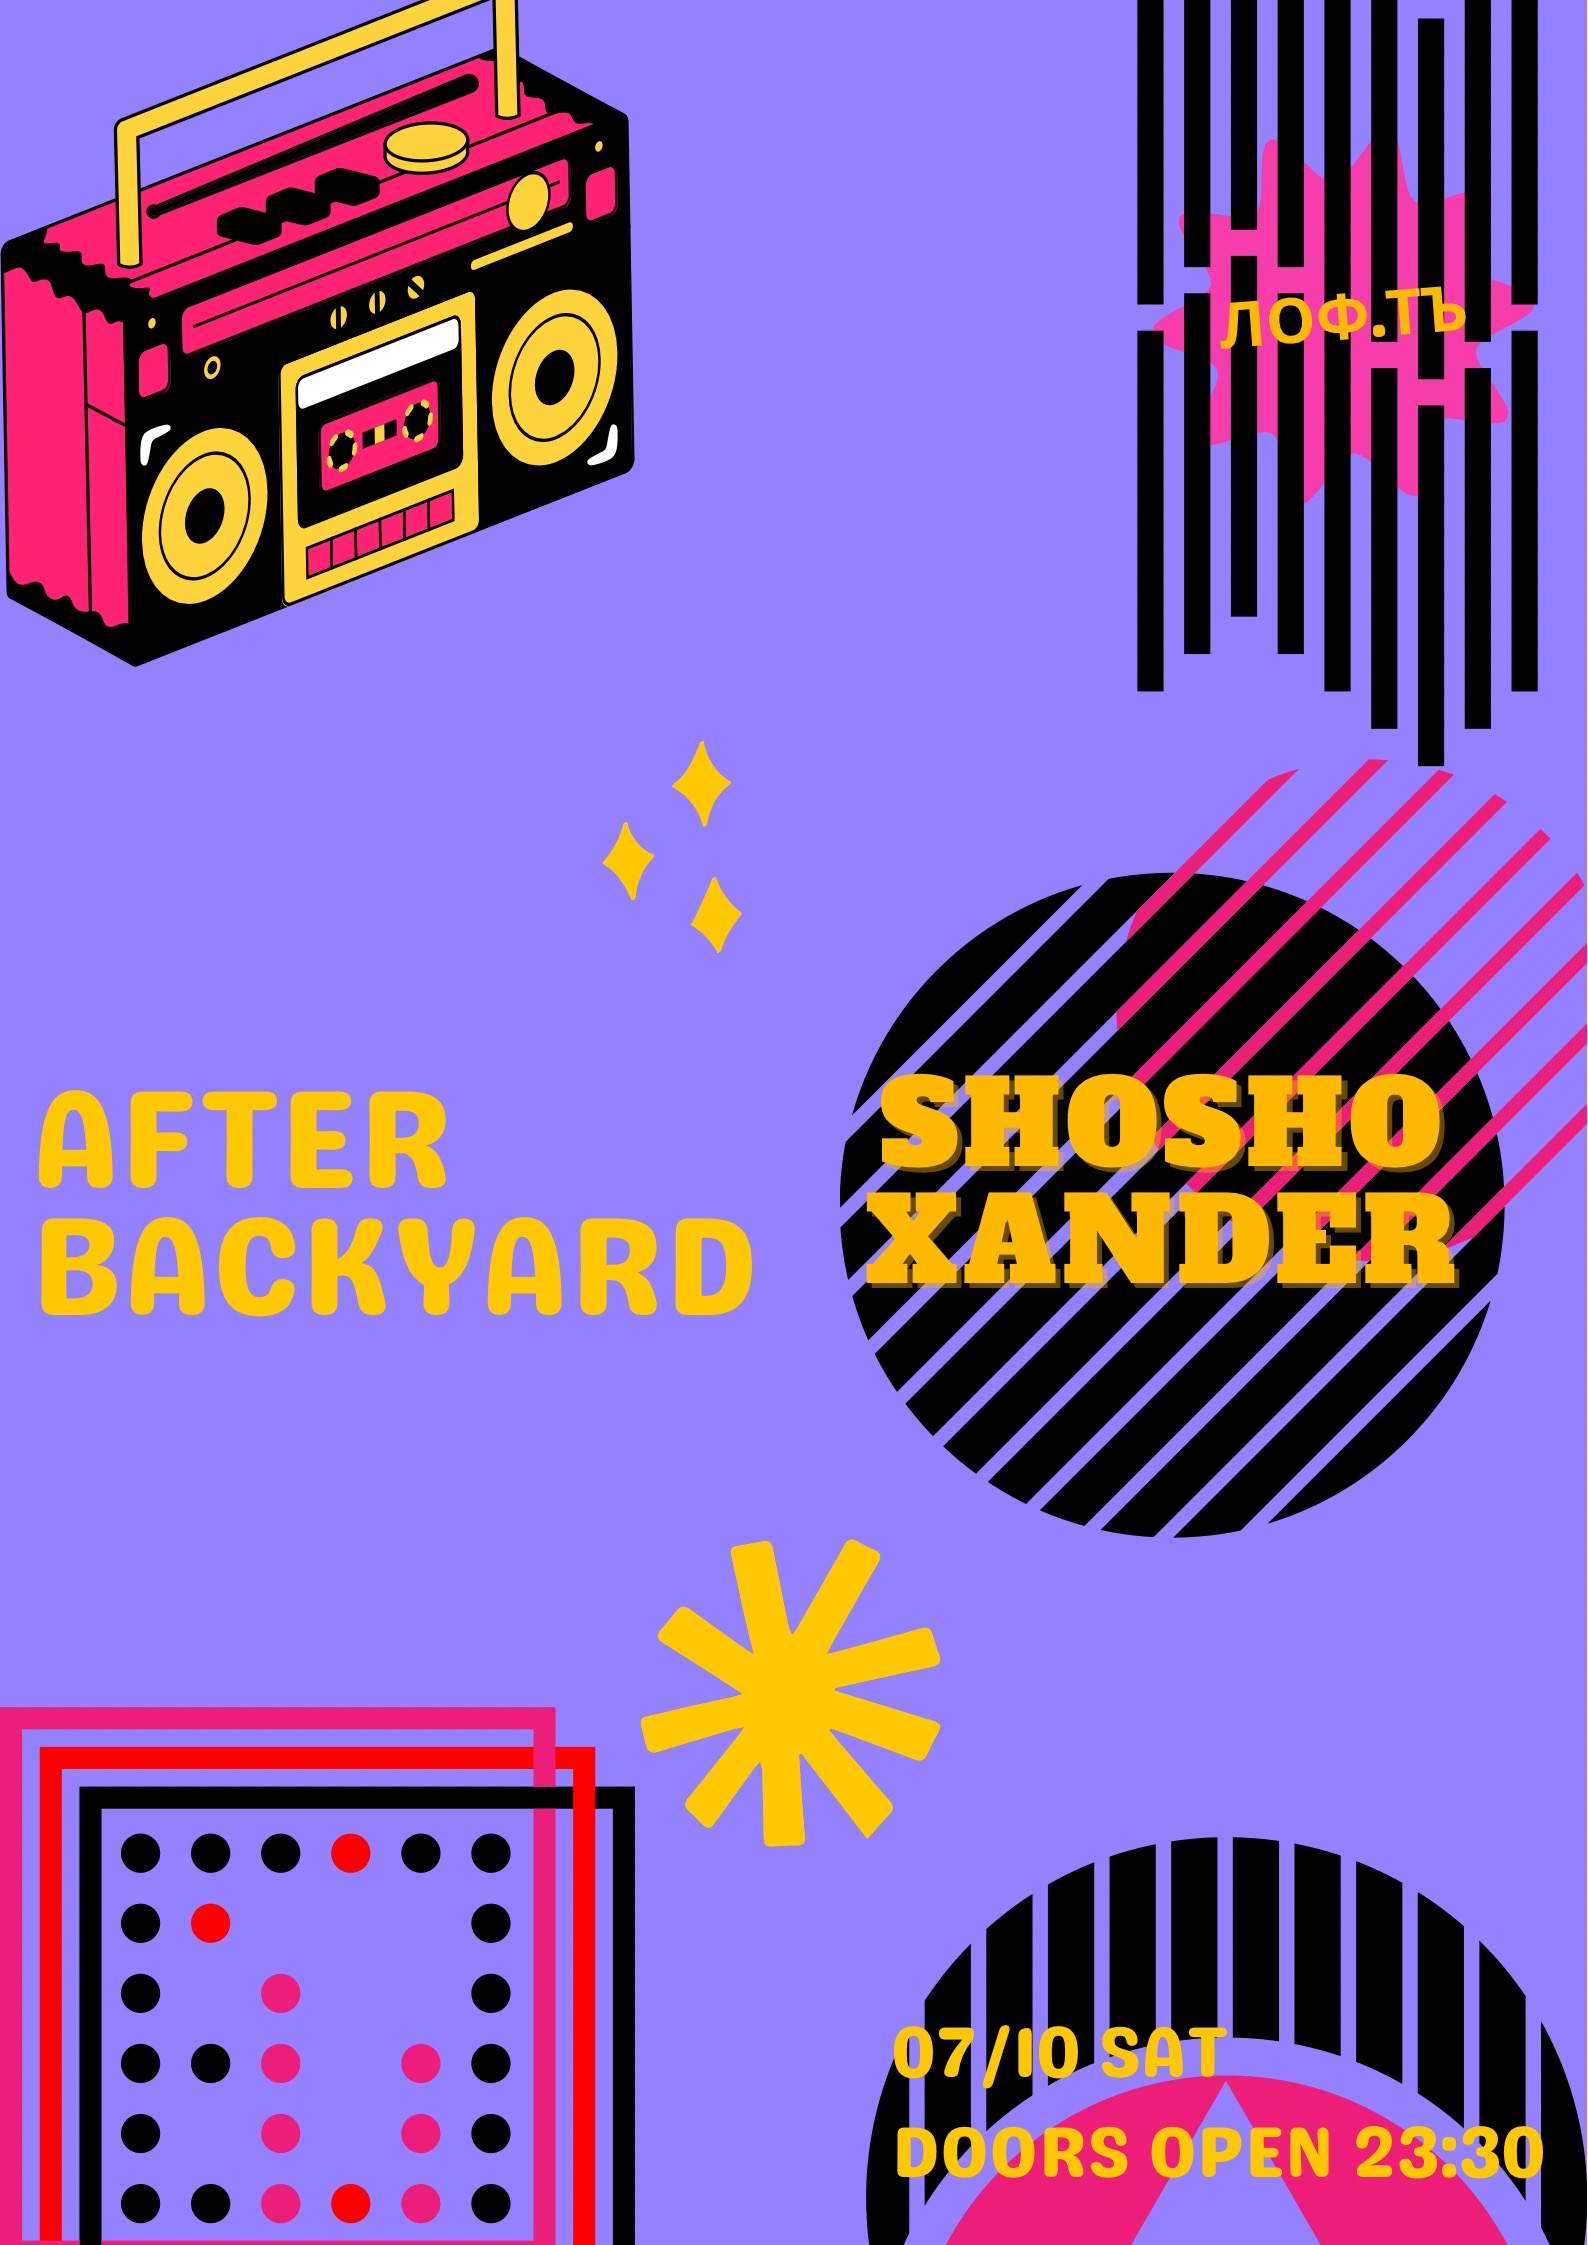 Move on the Backyard + AFTER - フライヤー裏